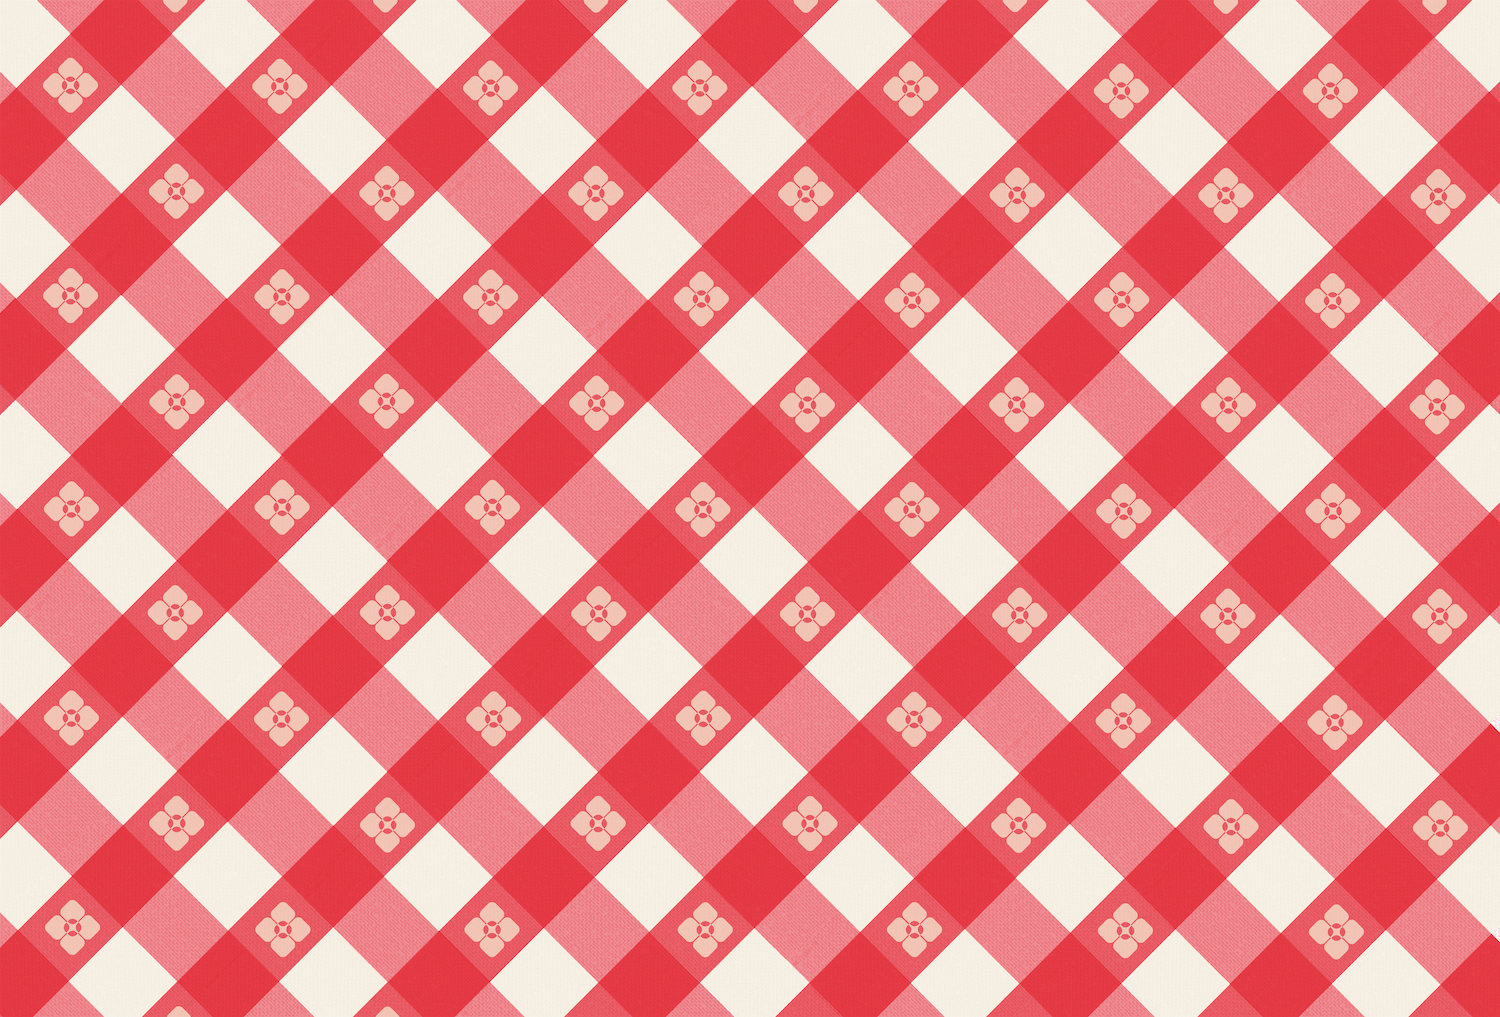 A picnic table-inspired design featuring a red diagonal gingham pattern with floral accents on a white background, high-resolution.